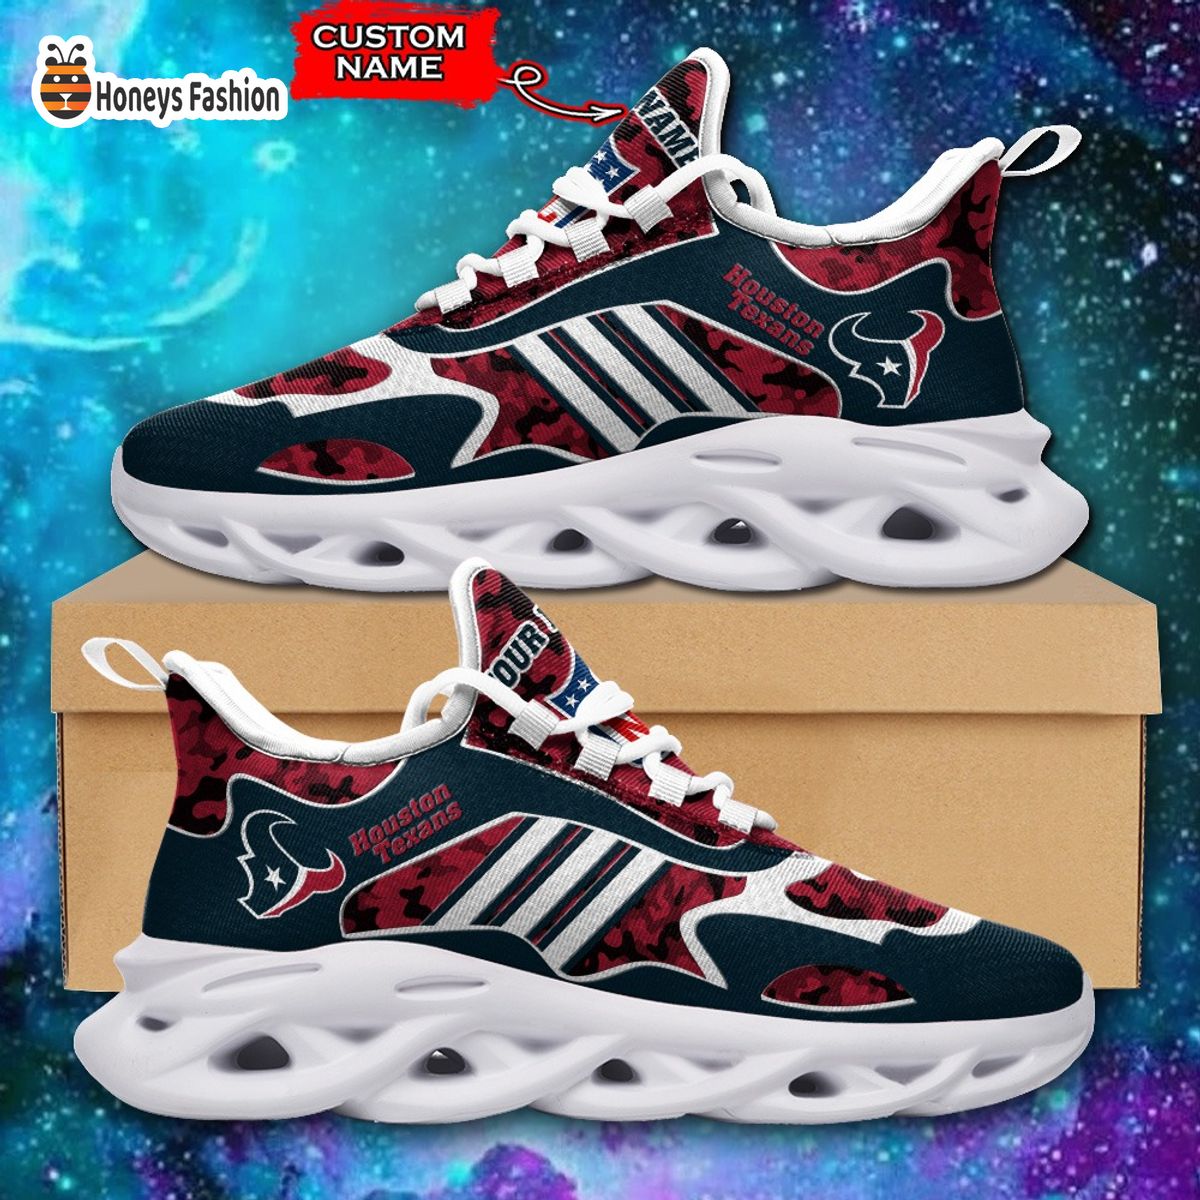 Houston Texans NFL Adidas Personalized Max Soul Shoes